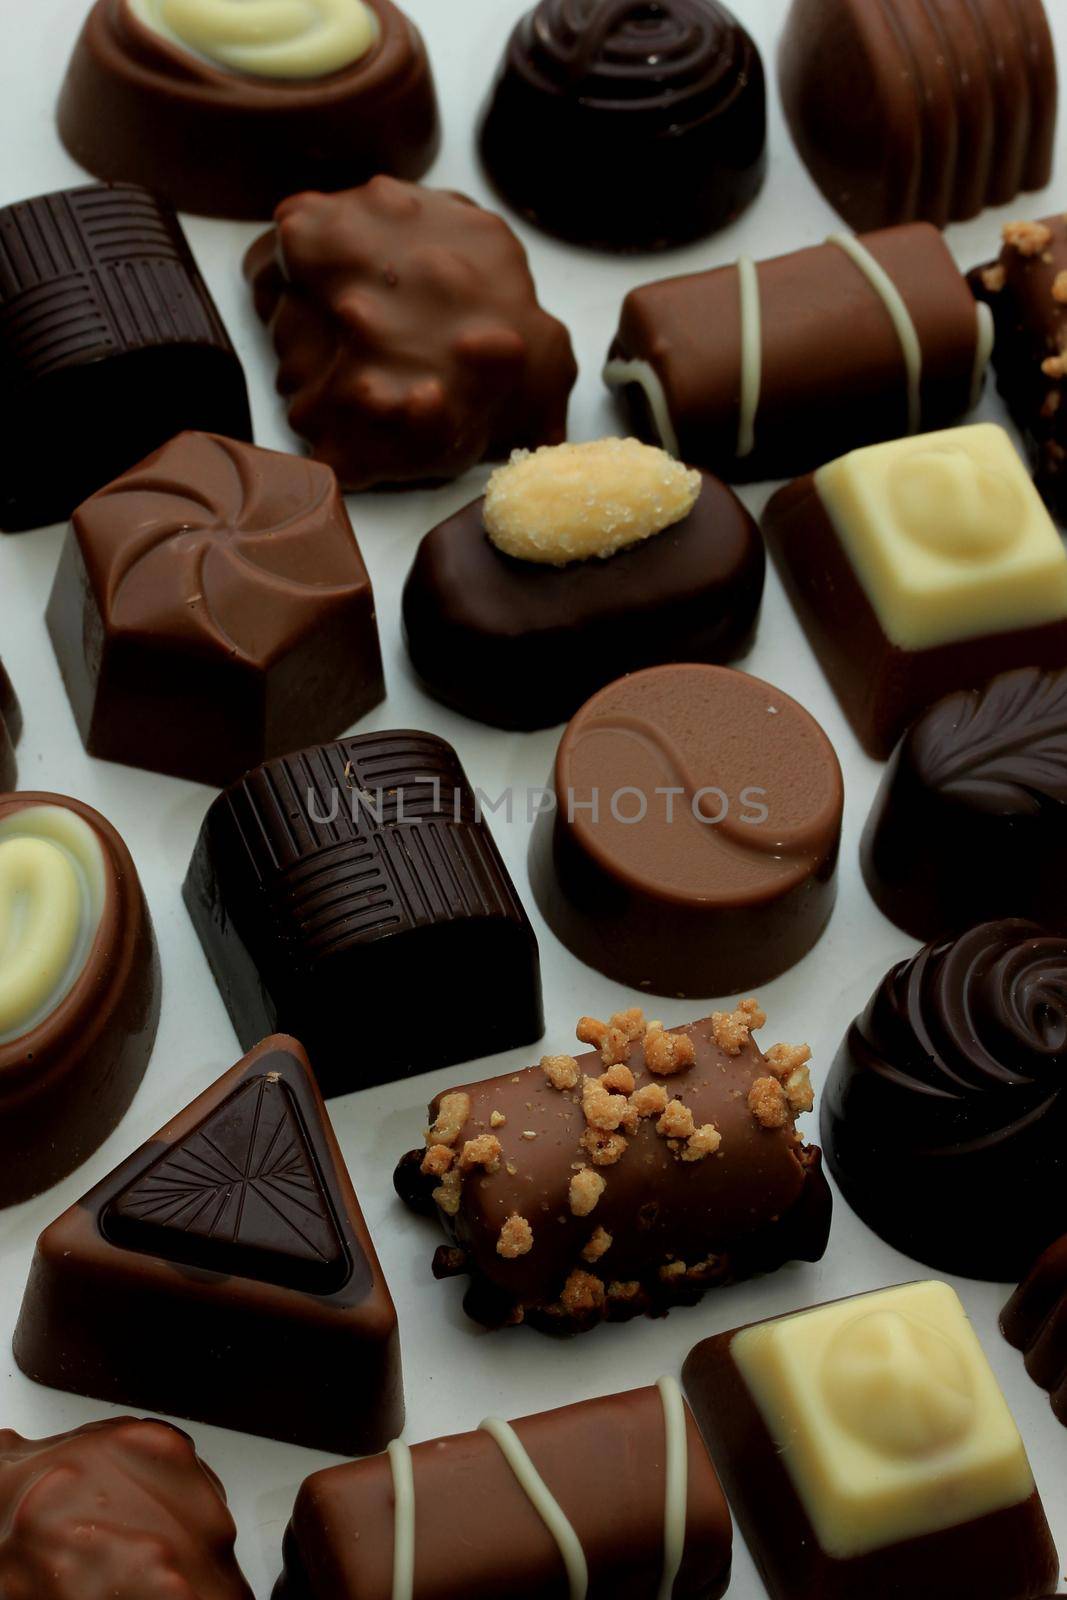 Luxurious chocolates in various shapes and colors by studioportosabbia